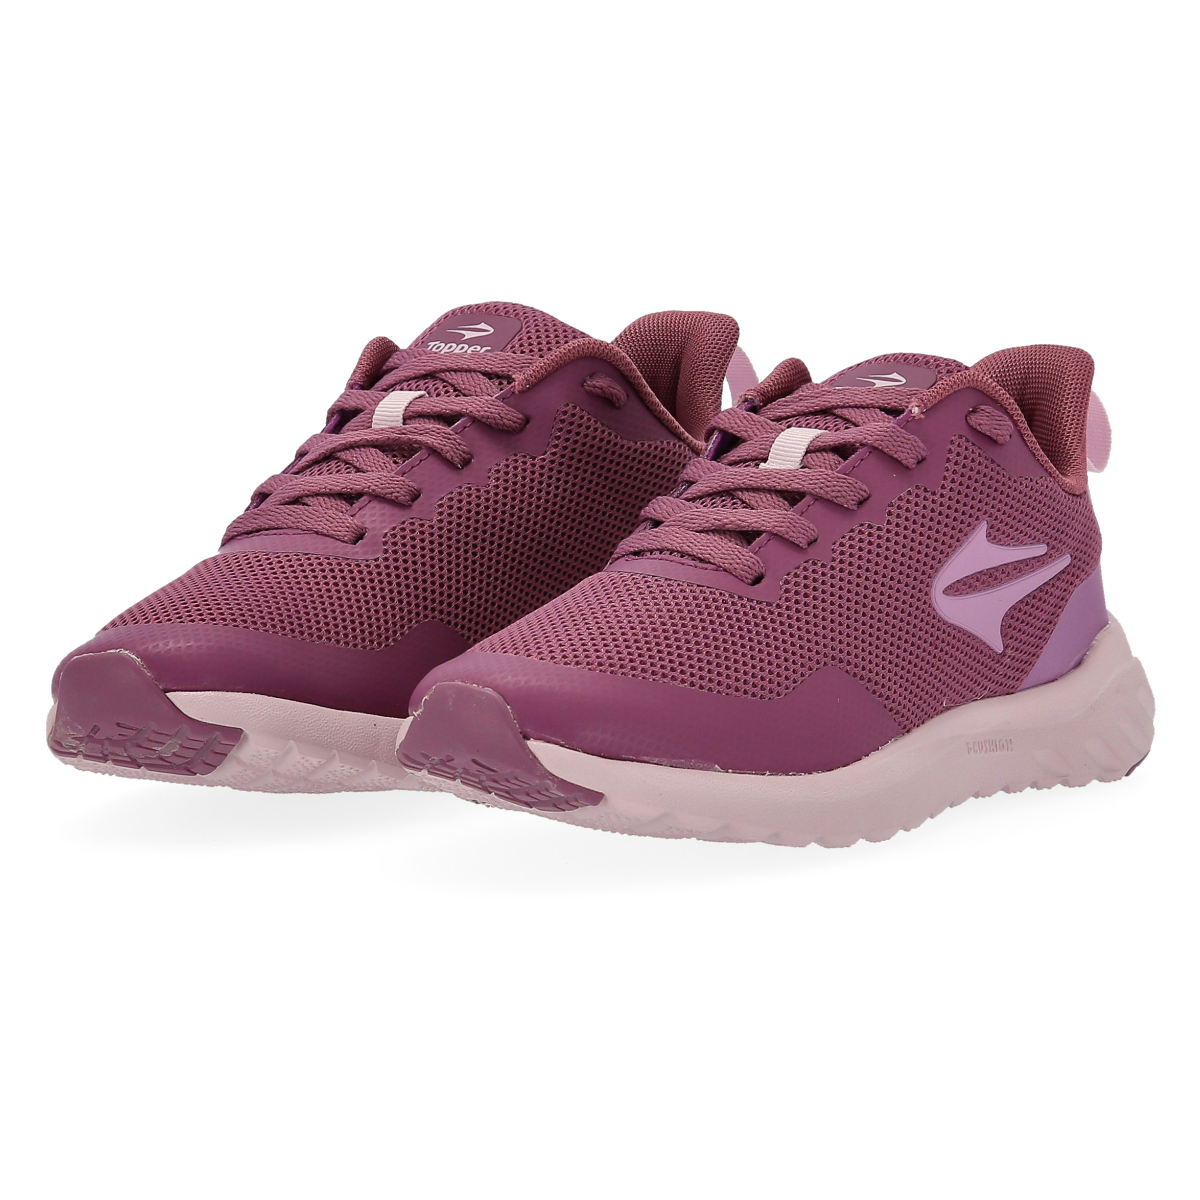 Zapatillas Entrenamiento Topper Strong Pace Lii Mujer,  image number null